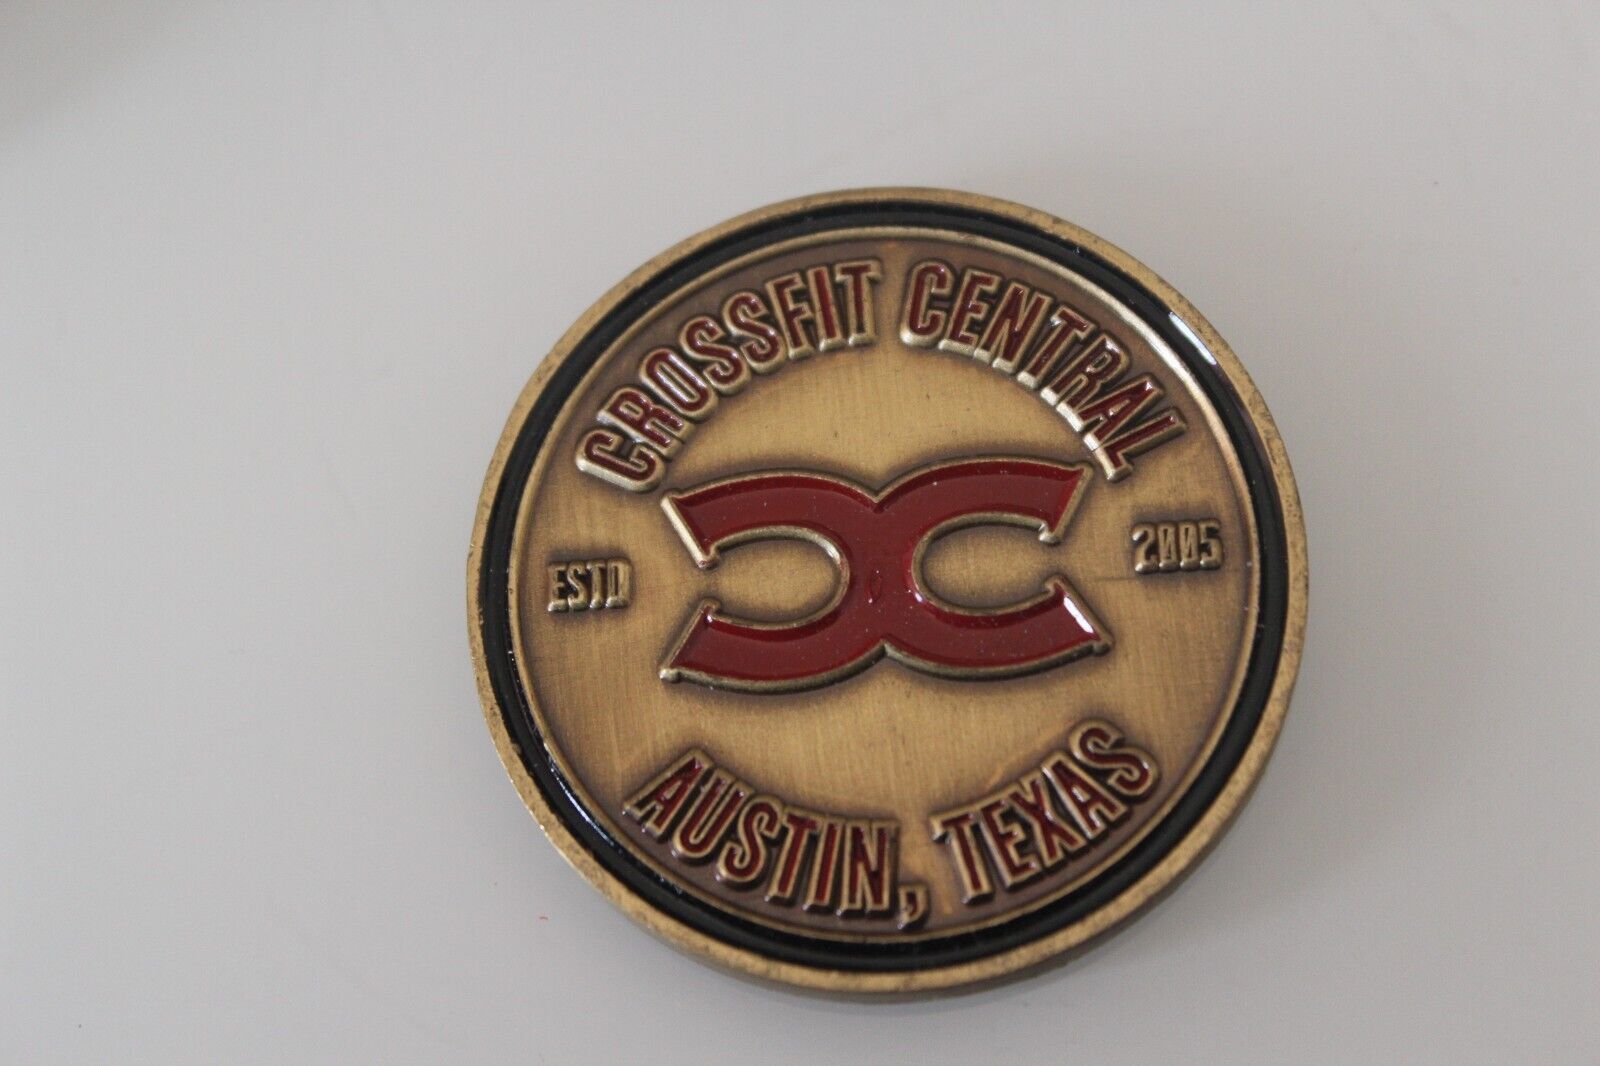 Crossfit Central Austin Texas Challenge Coin